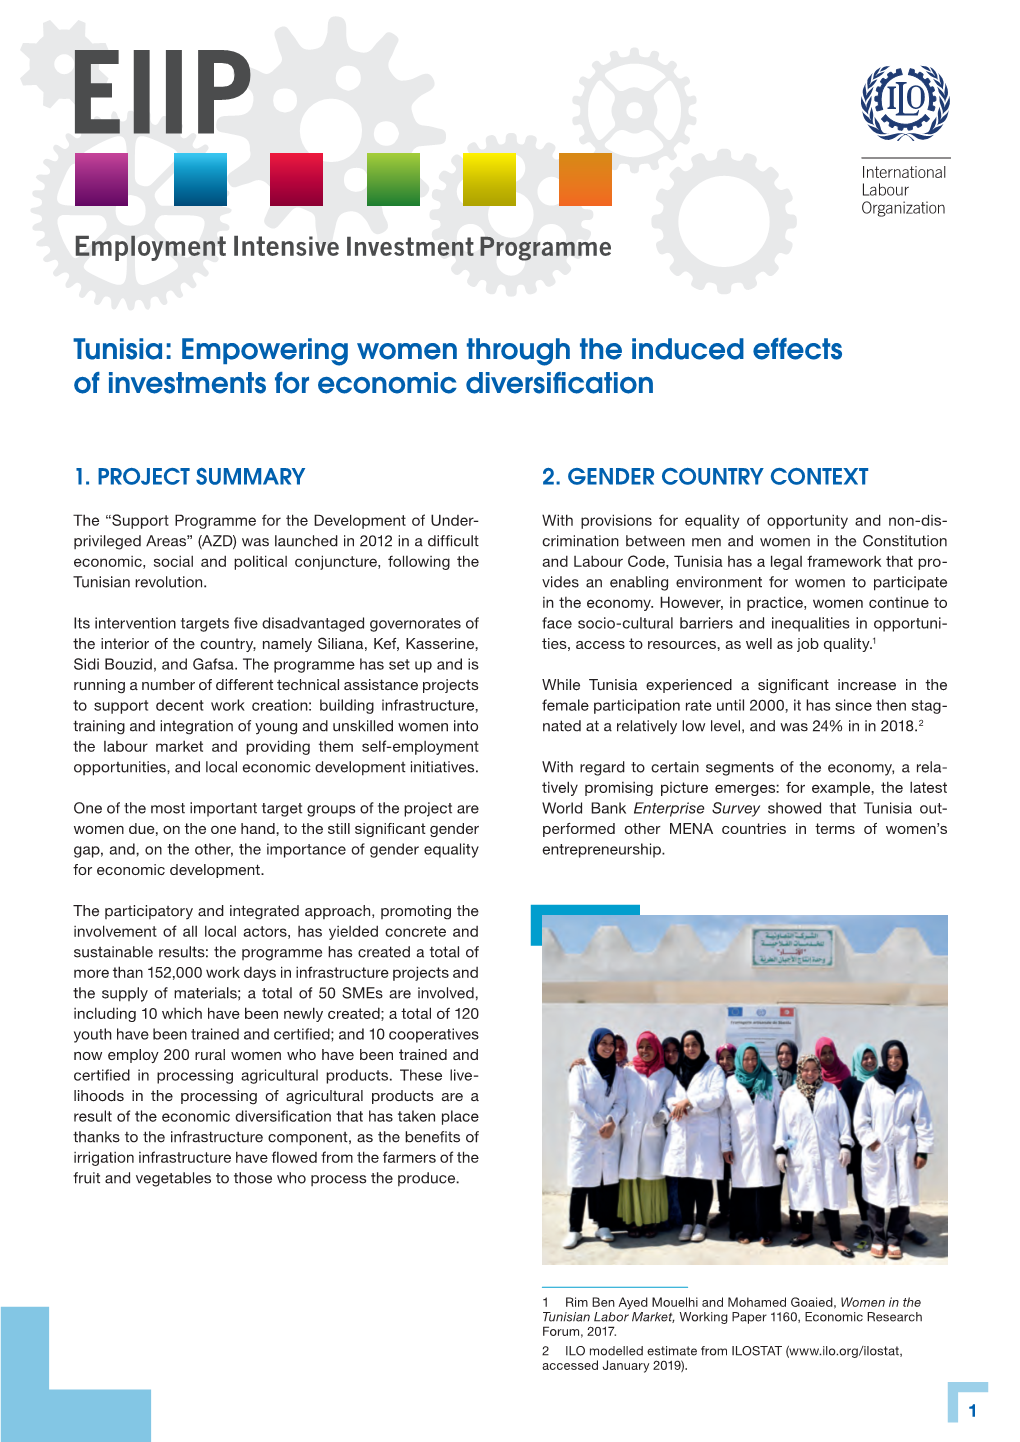 Tunisia: Empowering Women Through the Induced Effects of Investments for Economic Diversification